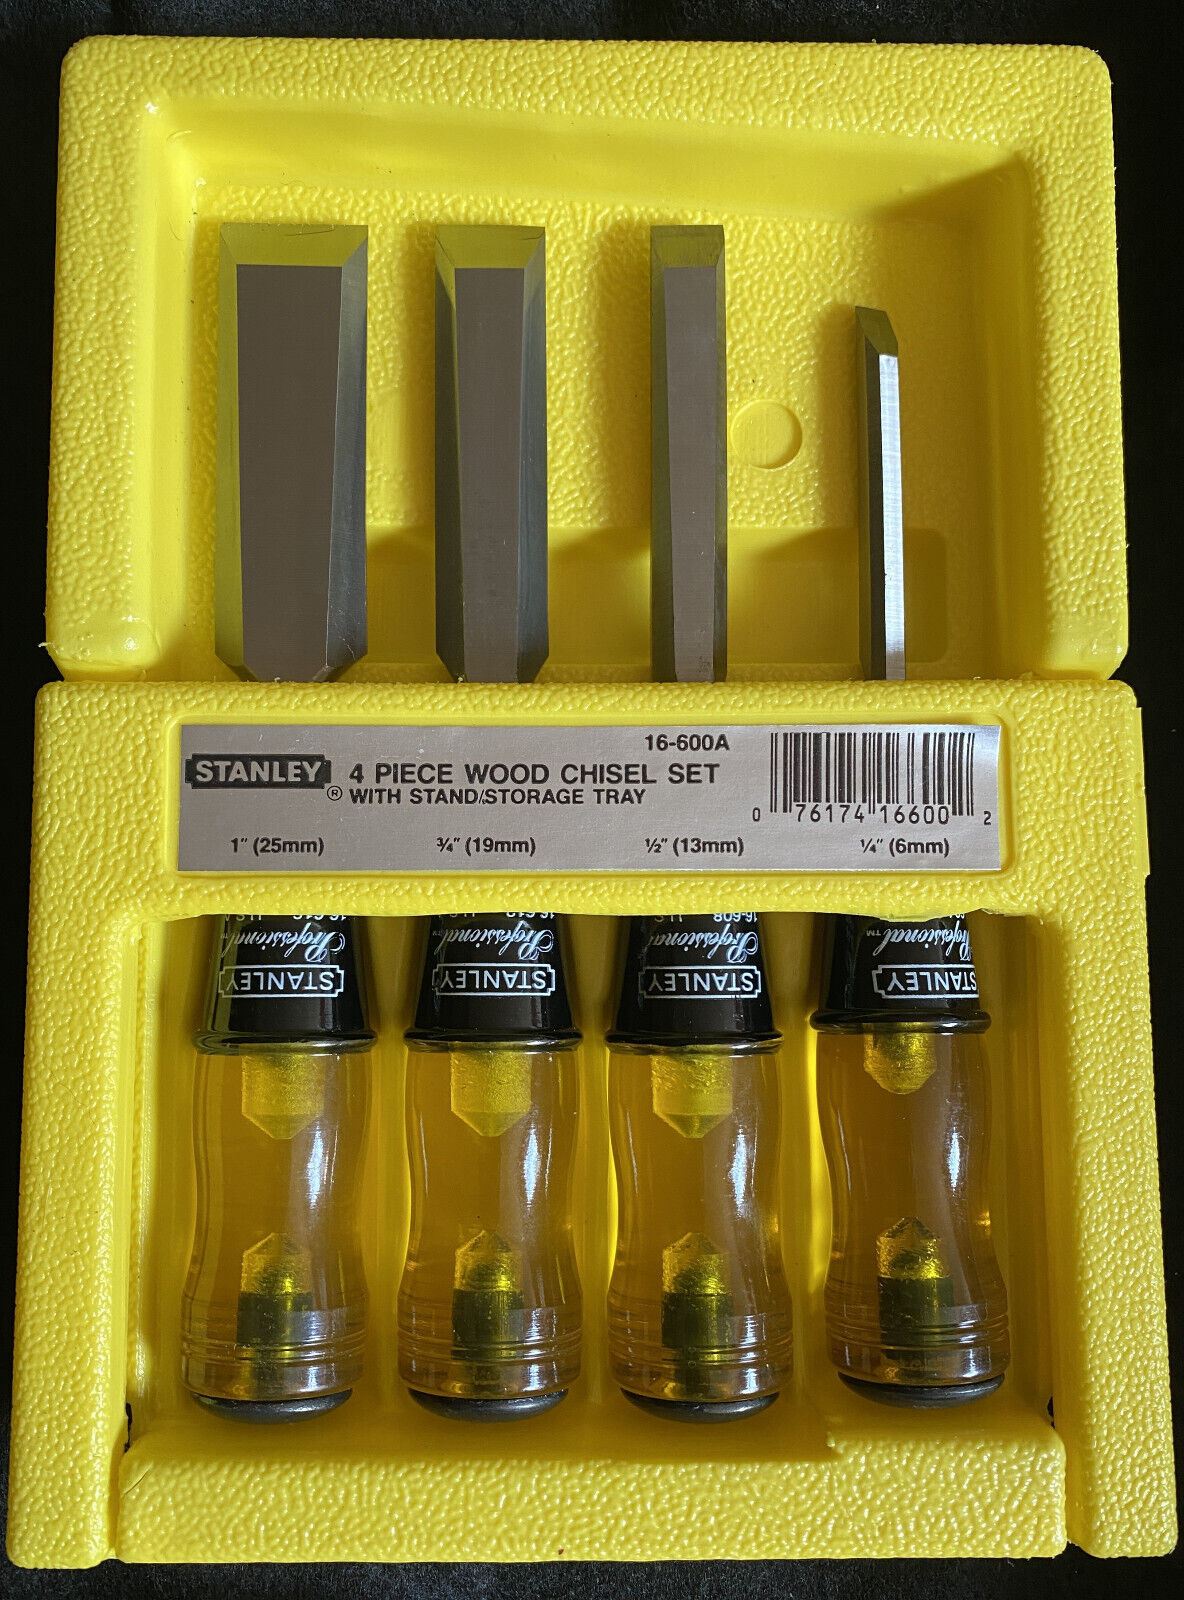 STANLEY PROFESSIONAL 4 PIECE WOOD CHISEL SET 16-600A WITH STAND/STORAGE TRAY